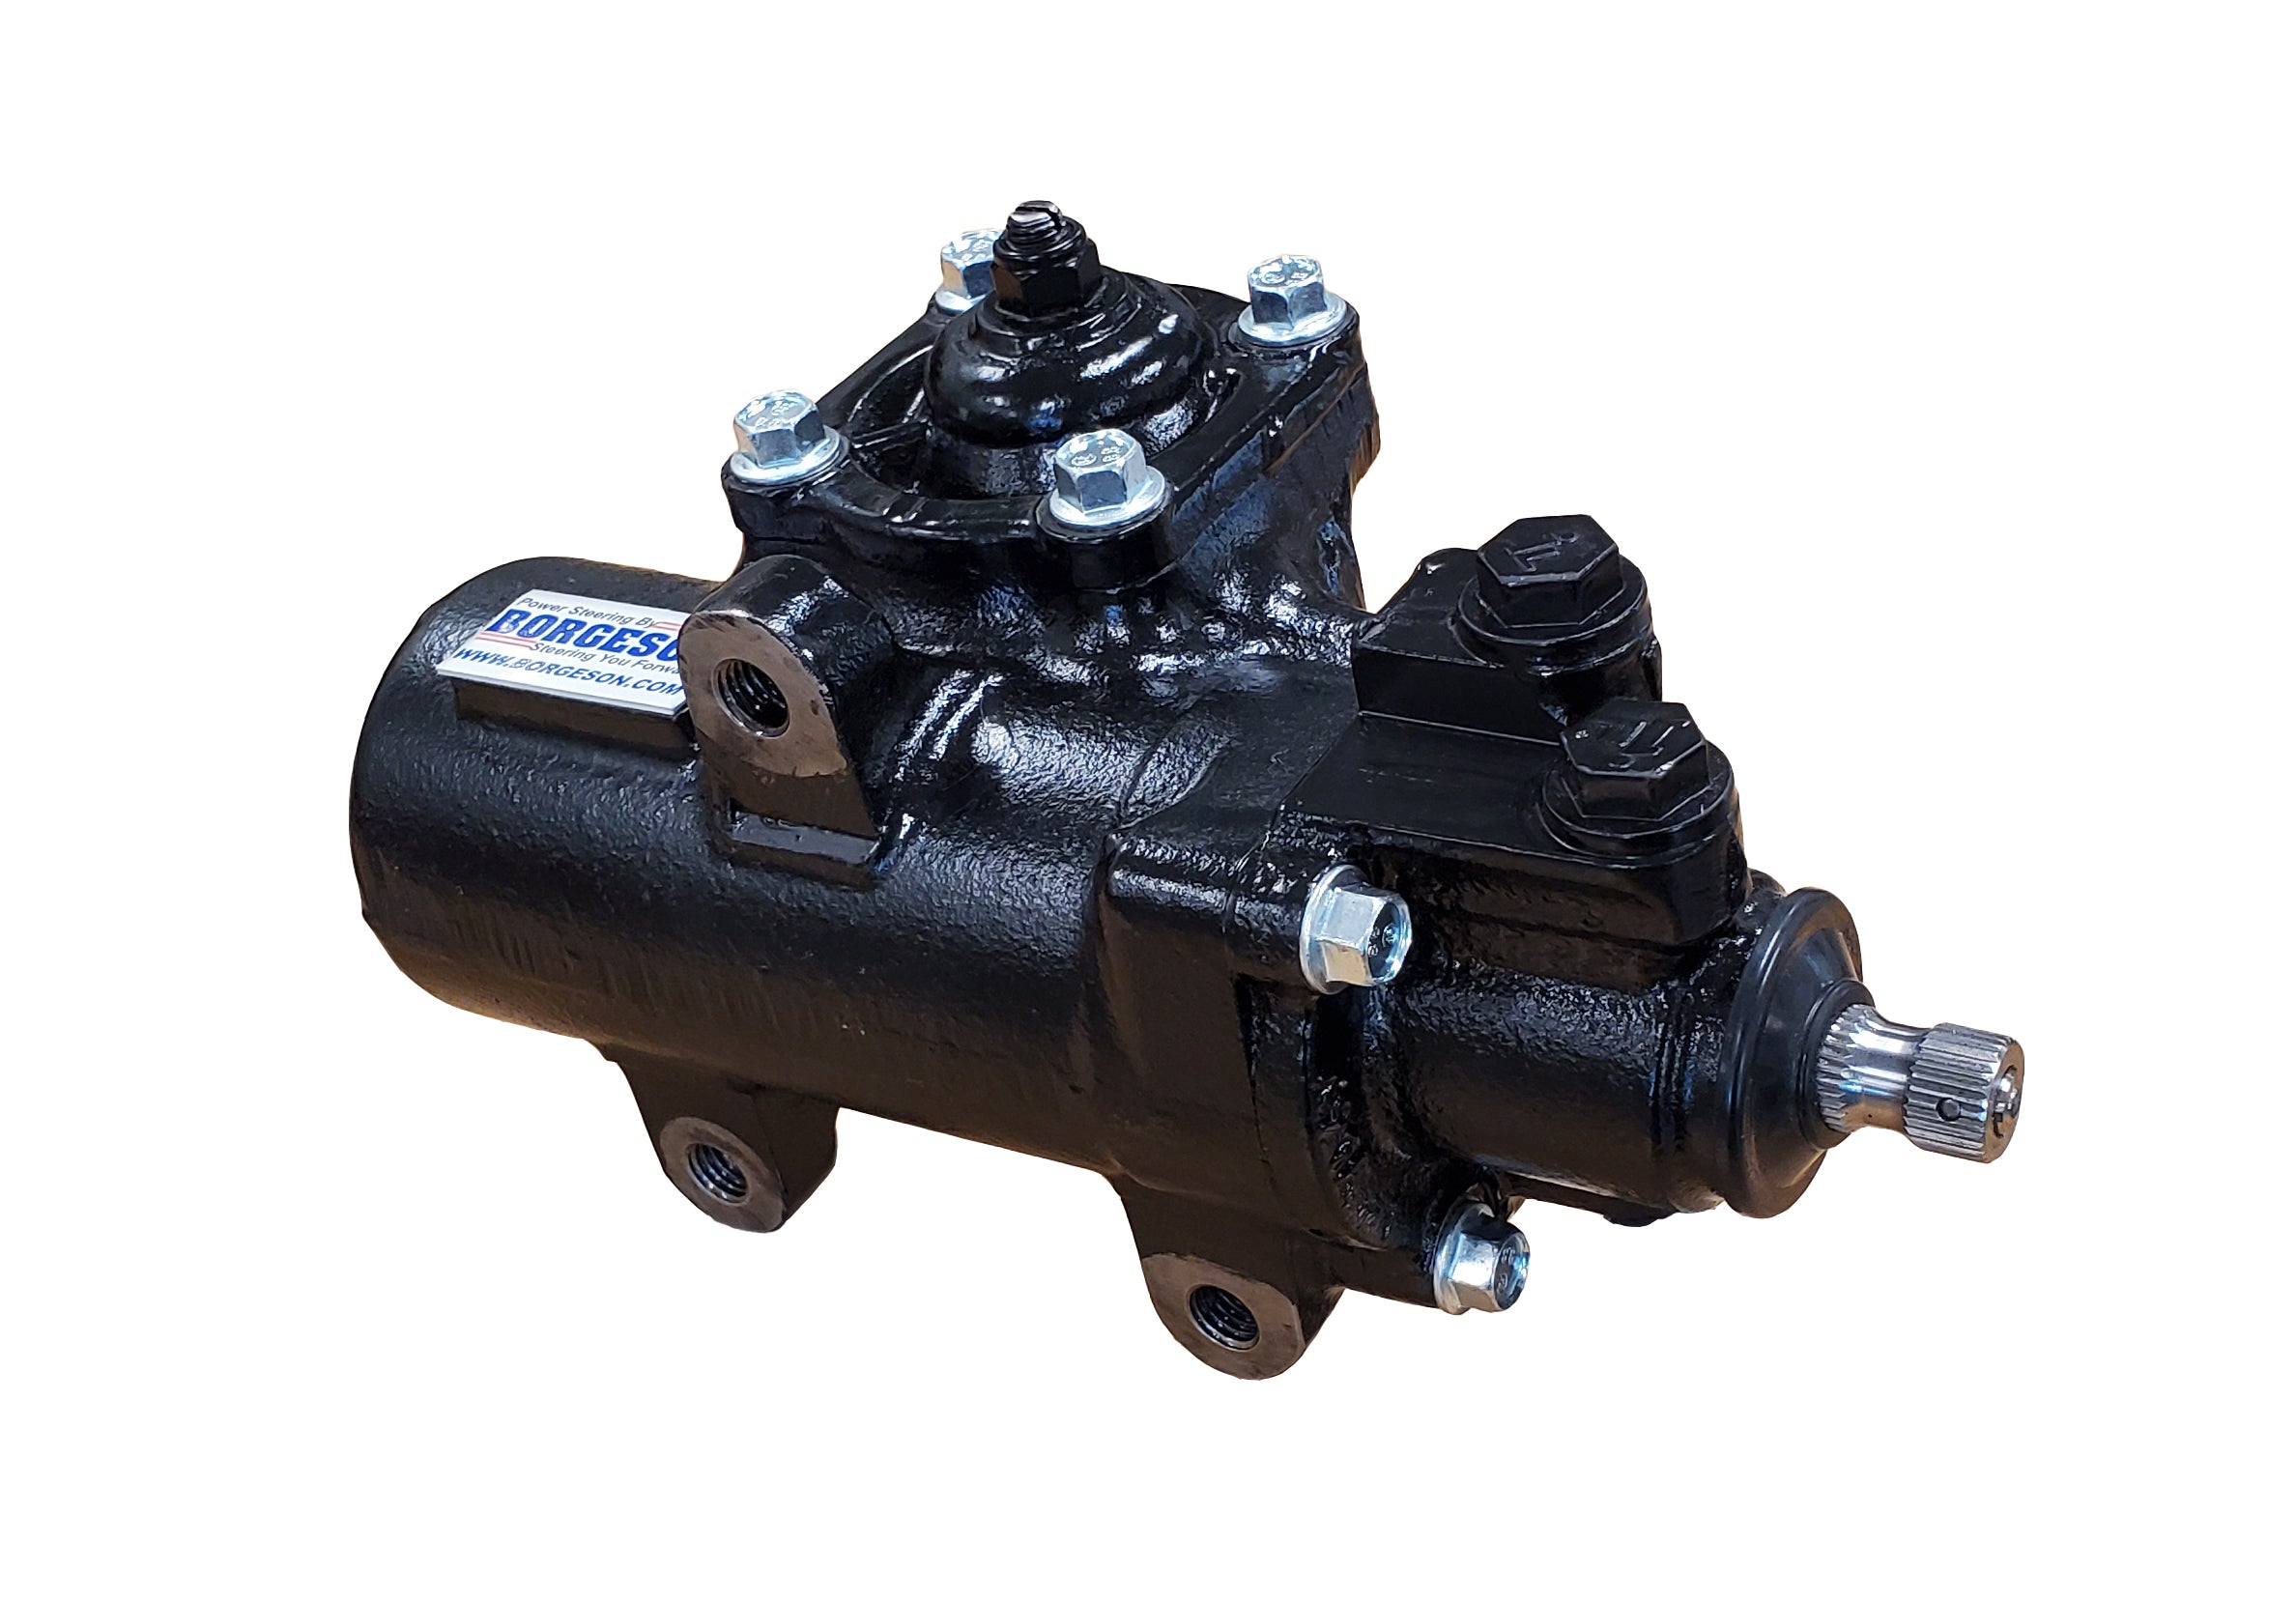 Borgeson Borgeson Street & Performance Quick Ratio OBS Power Steering Box. 12.7:1 Ratio. 800134